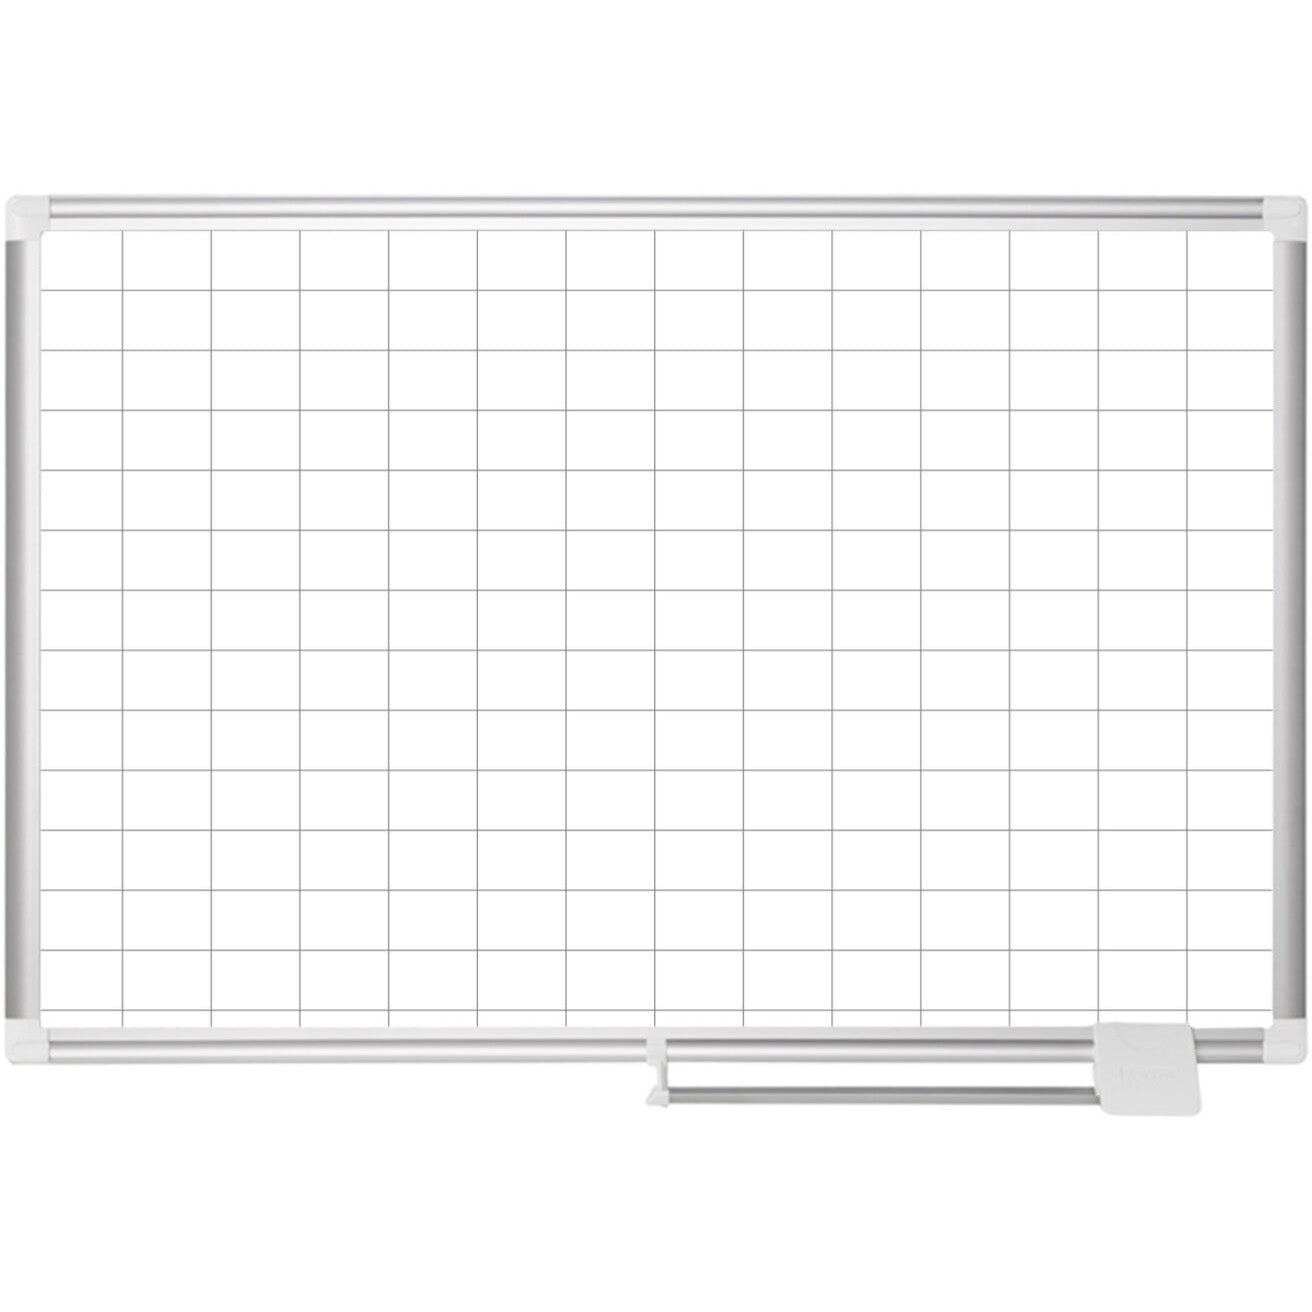 MA2793830 Magentic Dry Erase Planning White Board, 2" x 3" Grid, Laquered Steel Surface, Sliding Marker Tray, 48" x 72", Aluminum Frame by MasterVision